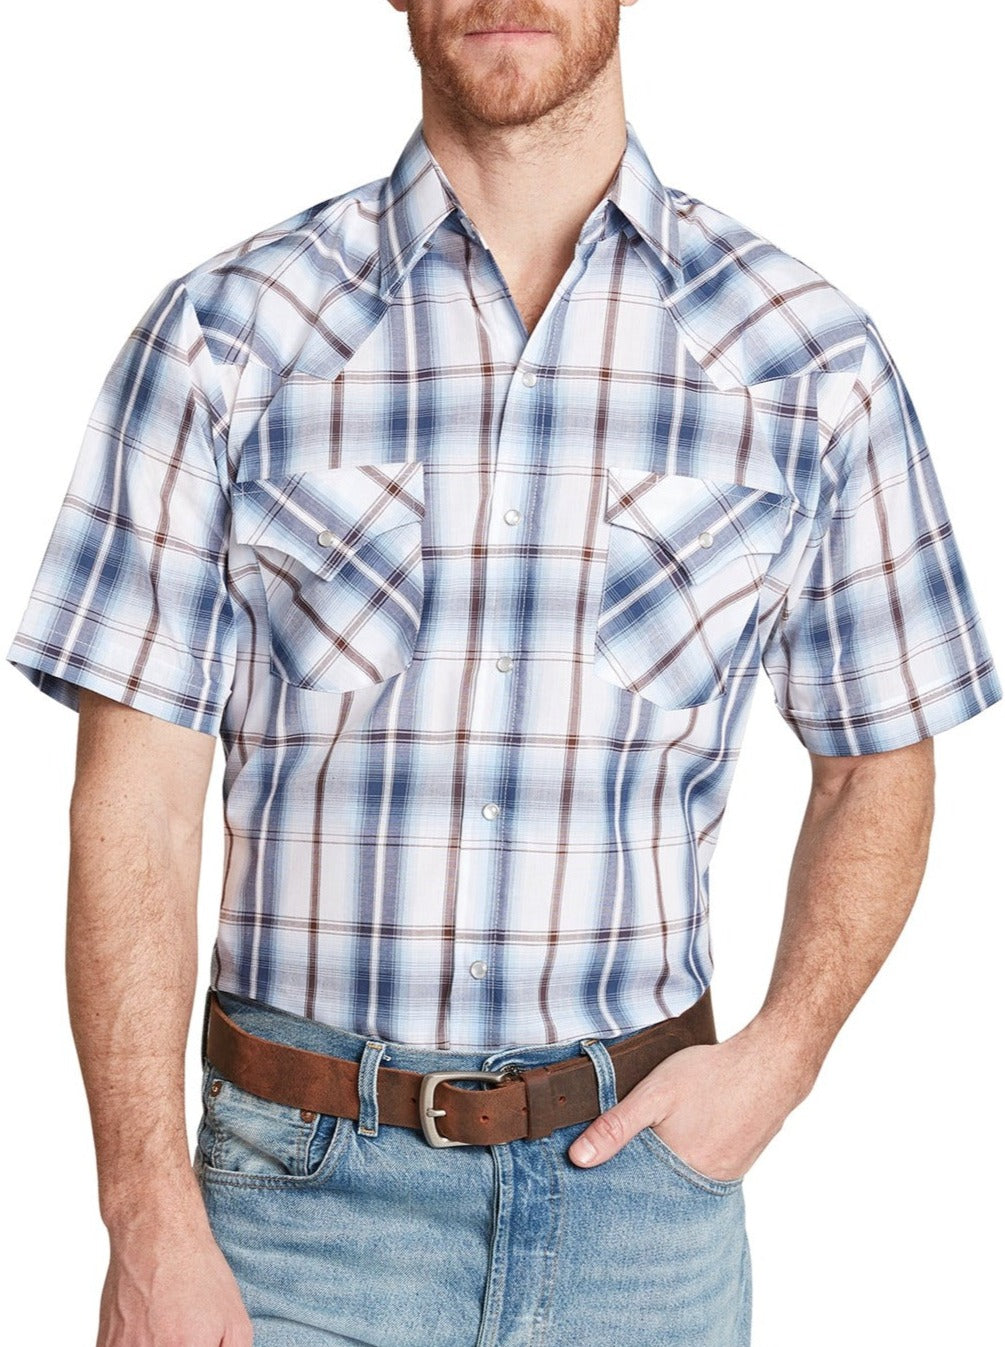 Authentic Western Wear Since 1878 | Ely Cattleman®